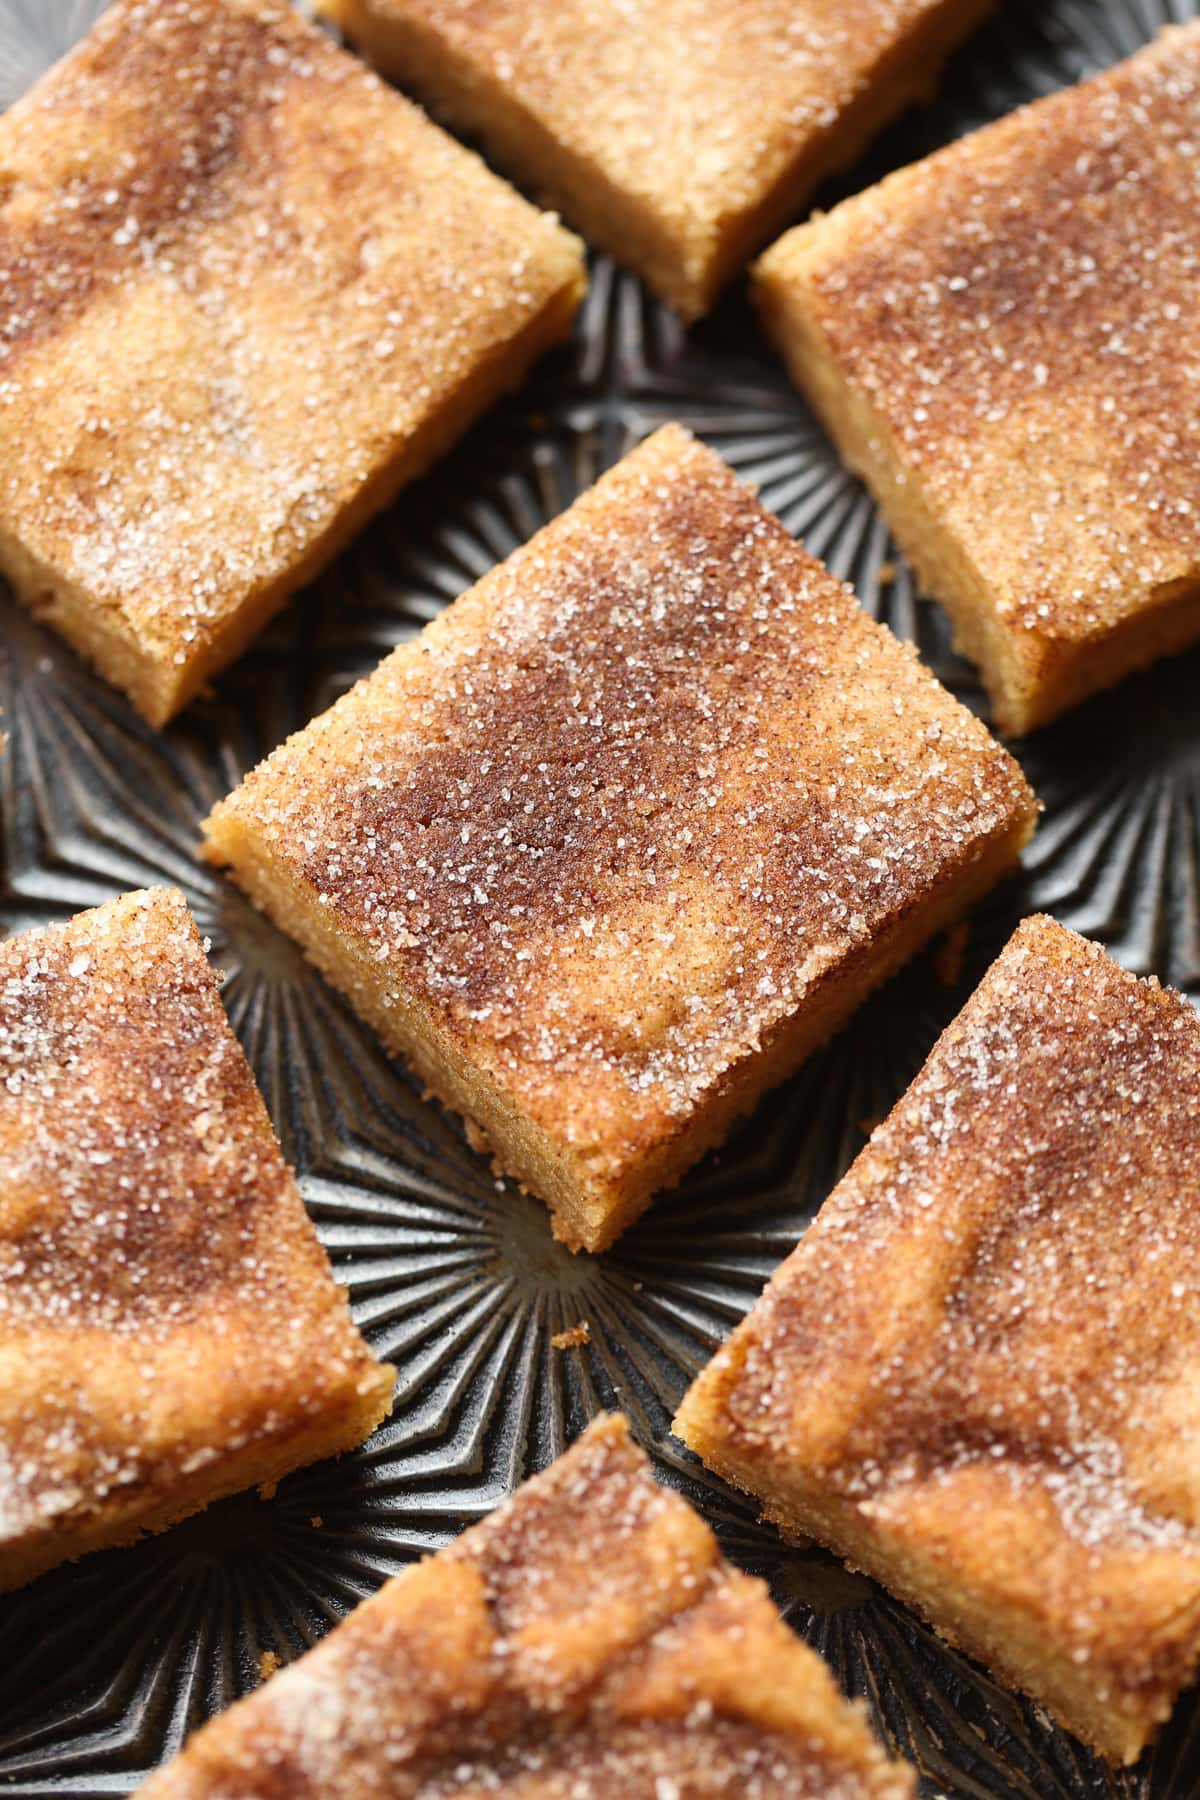 Cookie bars made with browned butter and topped with cinnamon sugar cut into squares on a baking sheet